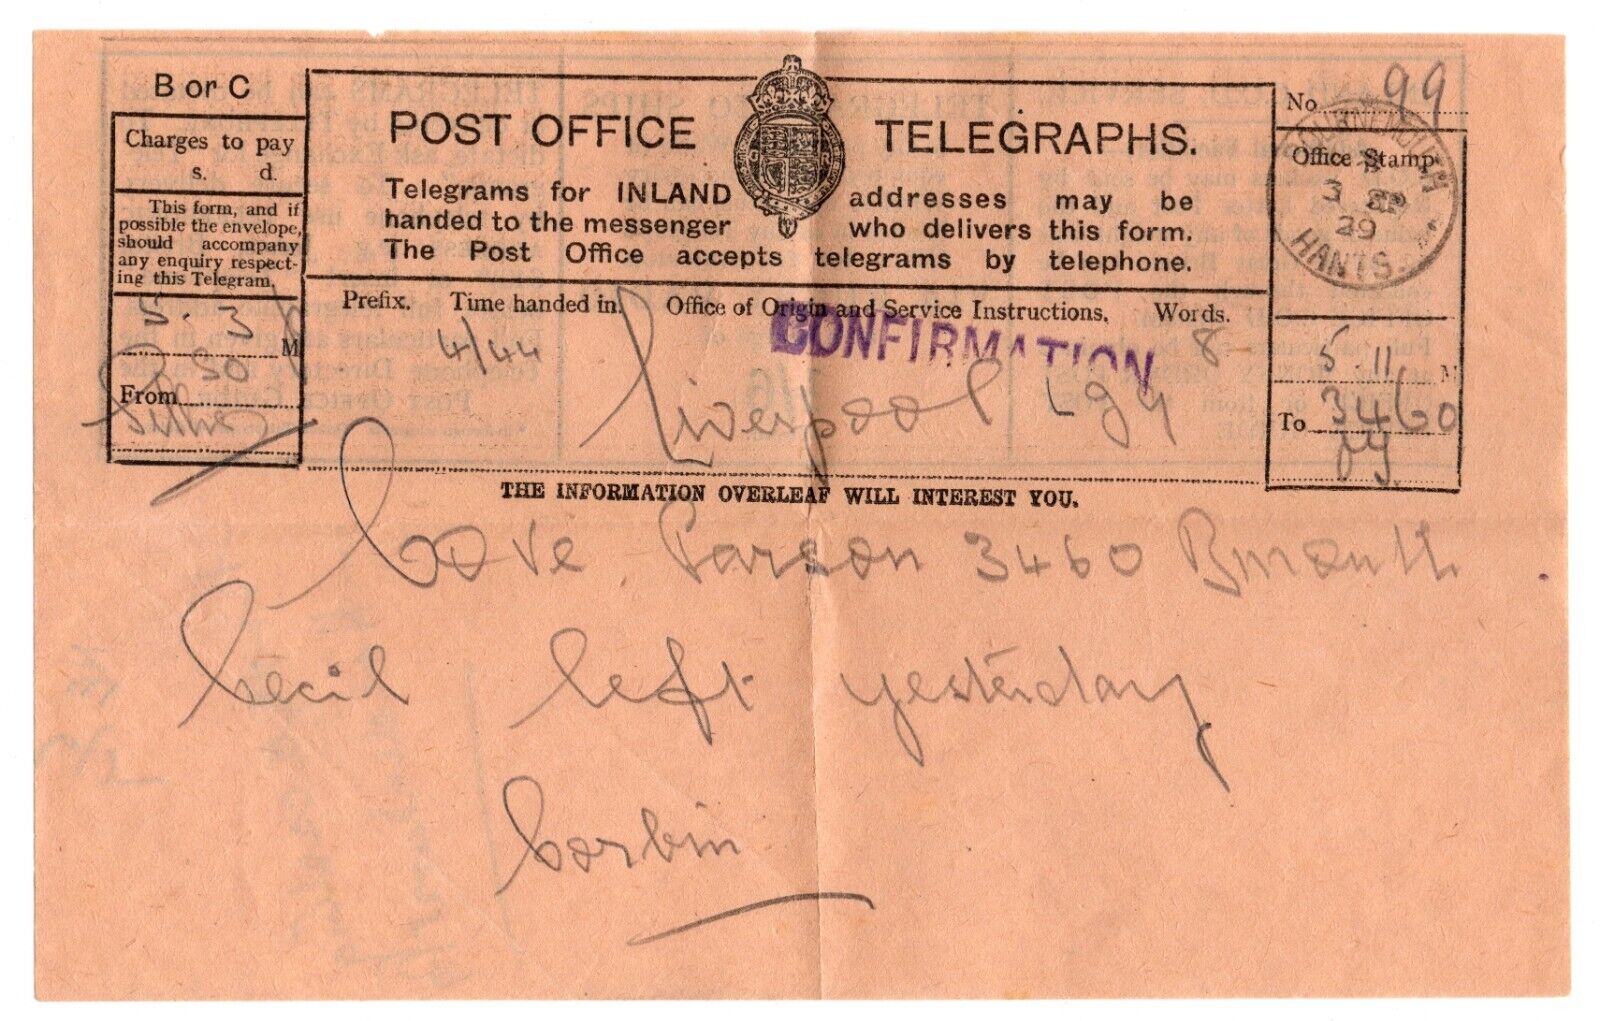 PO Telegraph Form of 3-9-1929 - front